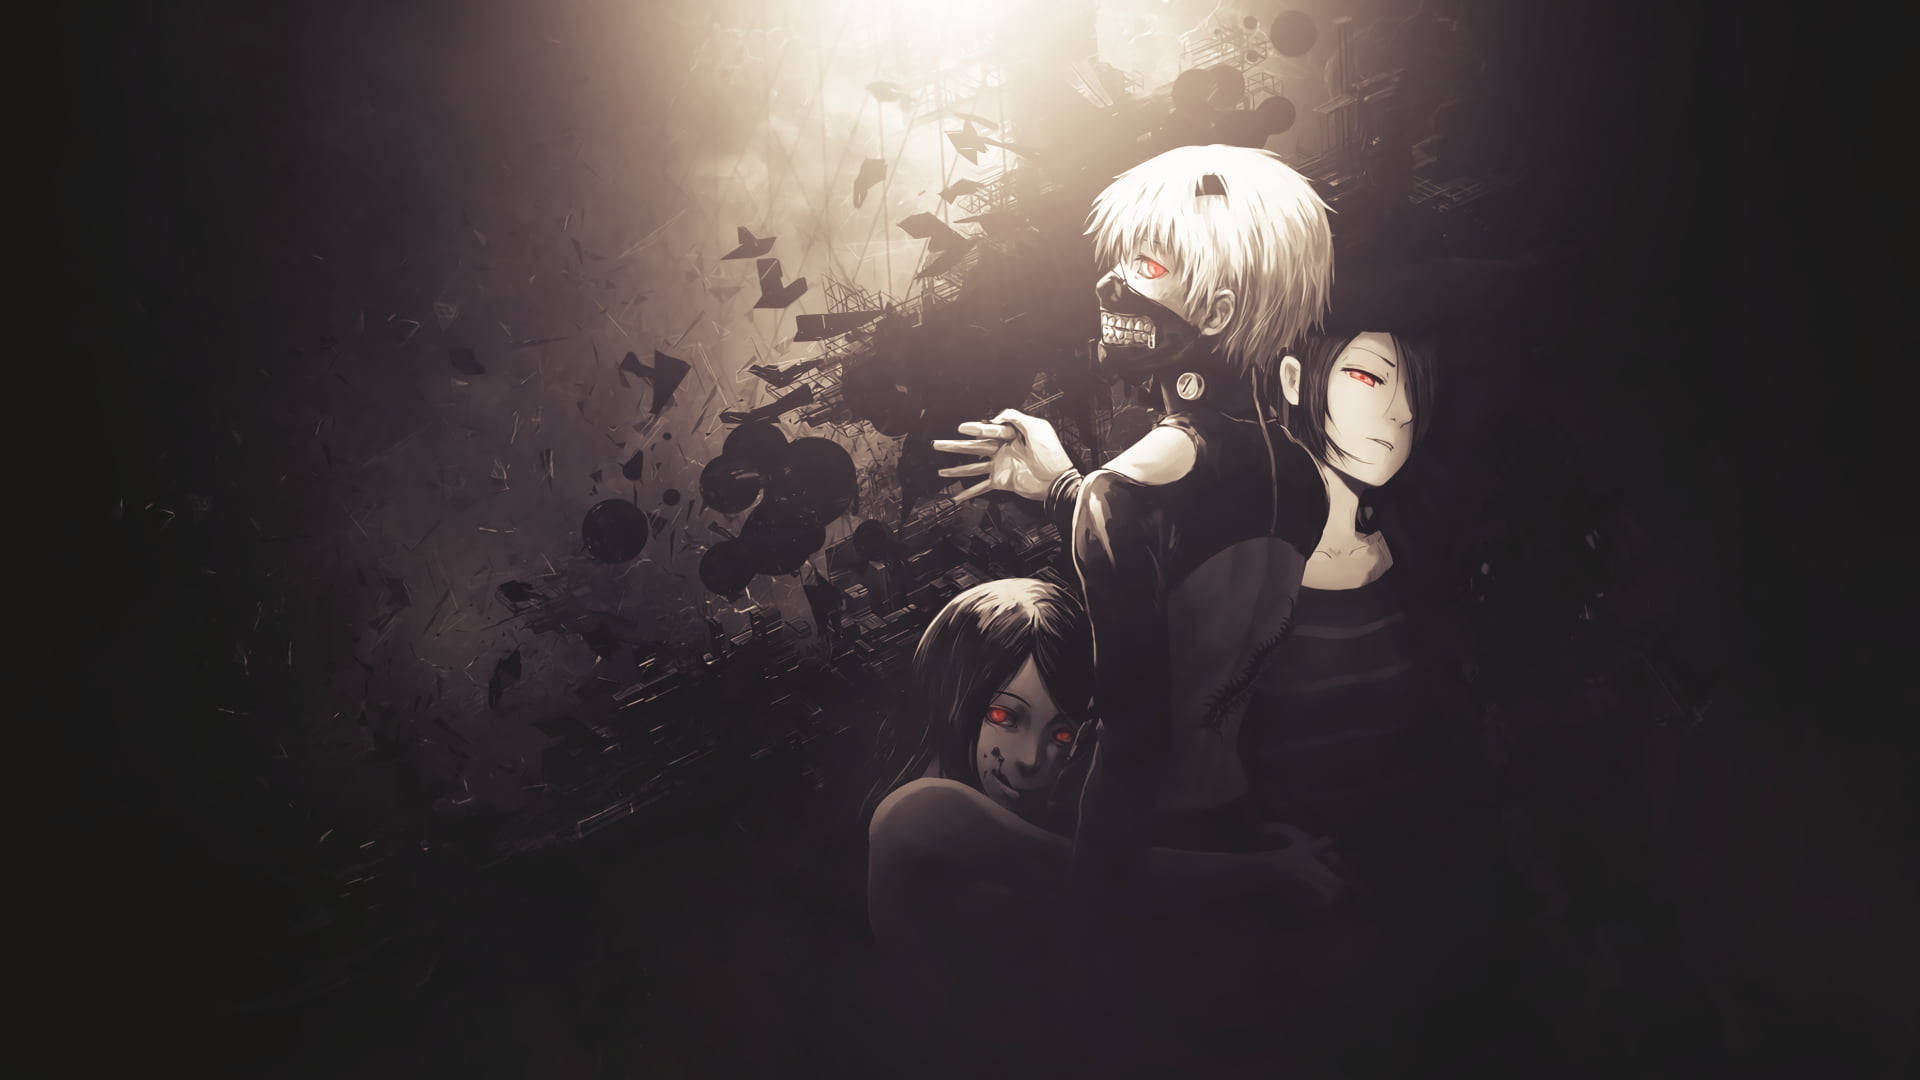 Tokyo Ghoul Aesthetic With Terrifying Characters Wallpaper